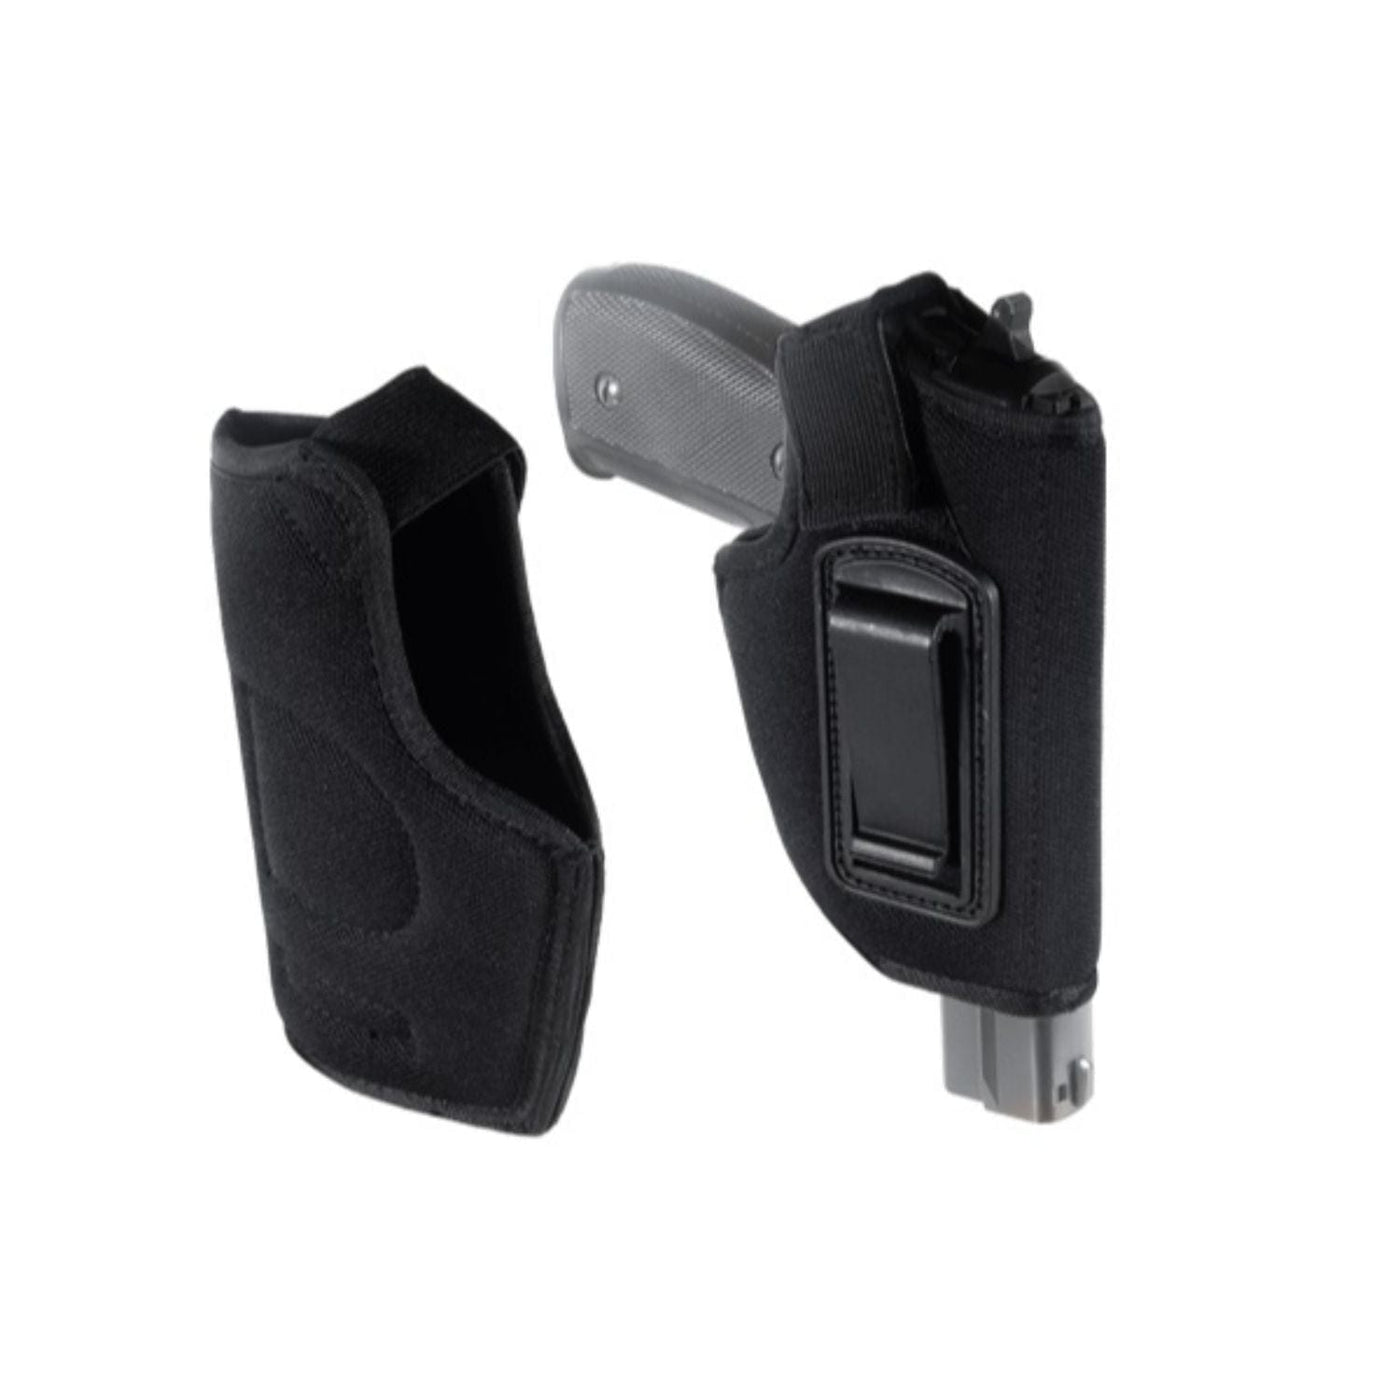 Leapers Leapers UTG Concealed Belt Holster Right Handed-Black Shooting